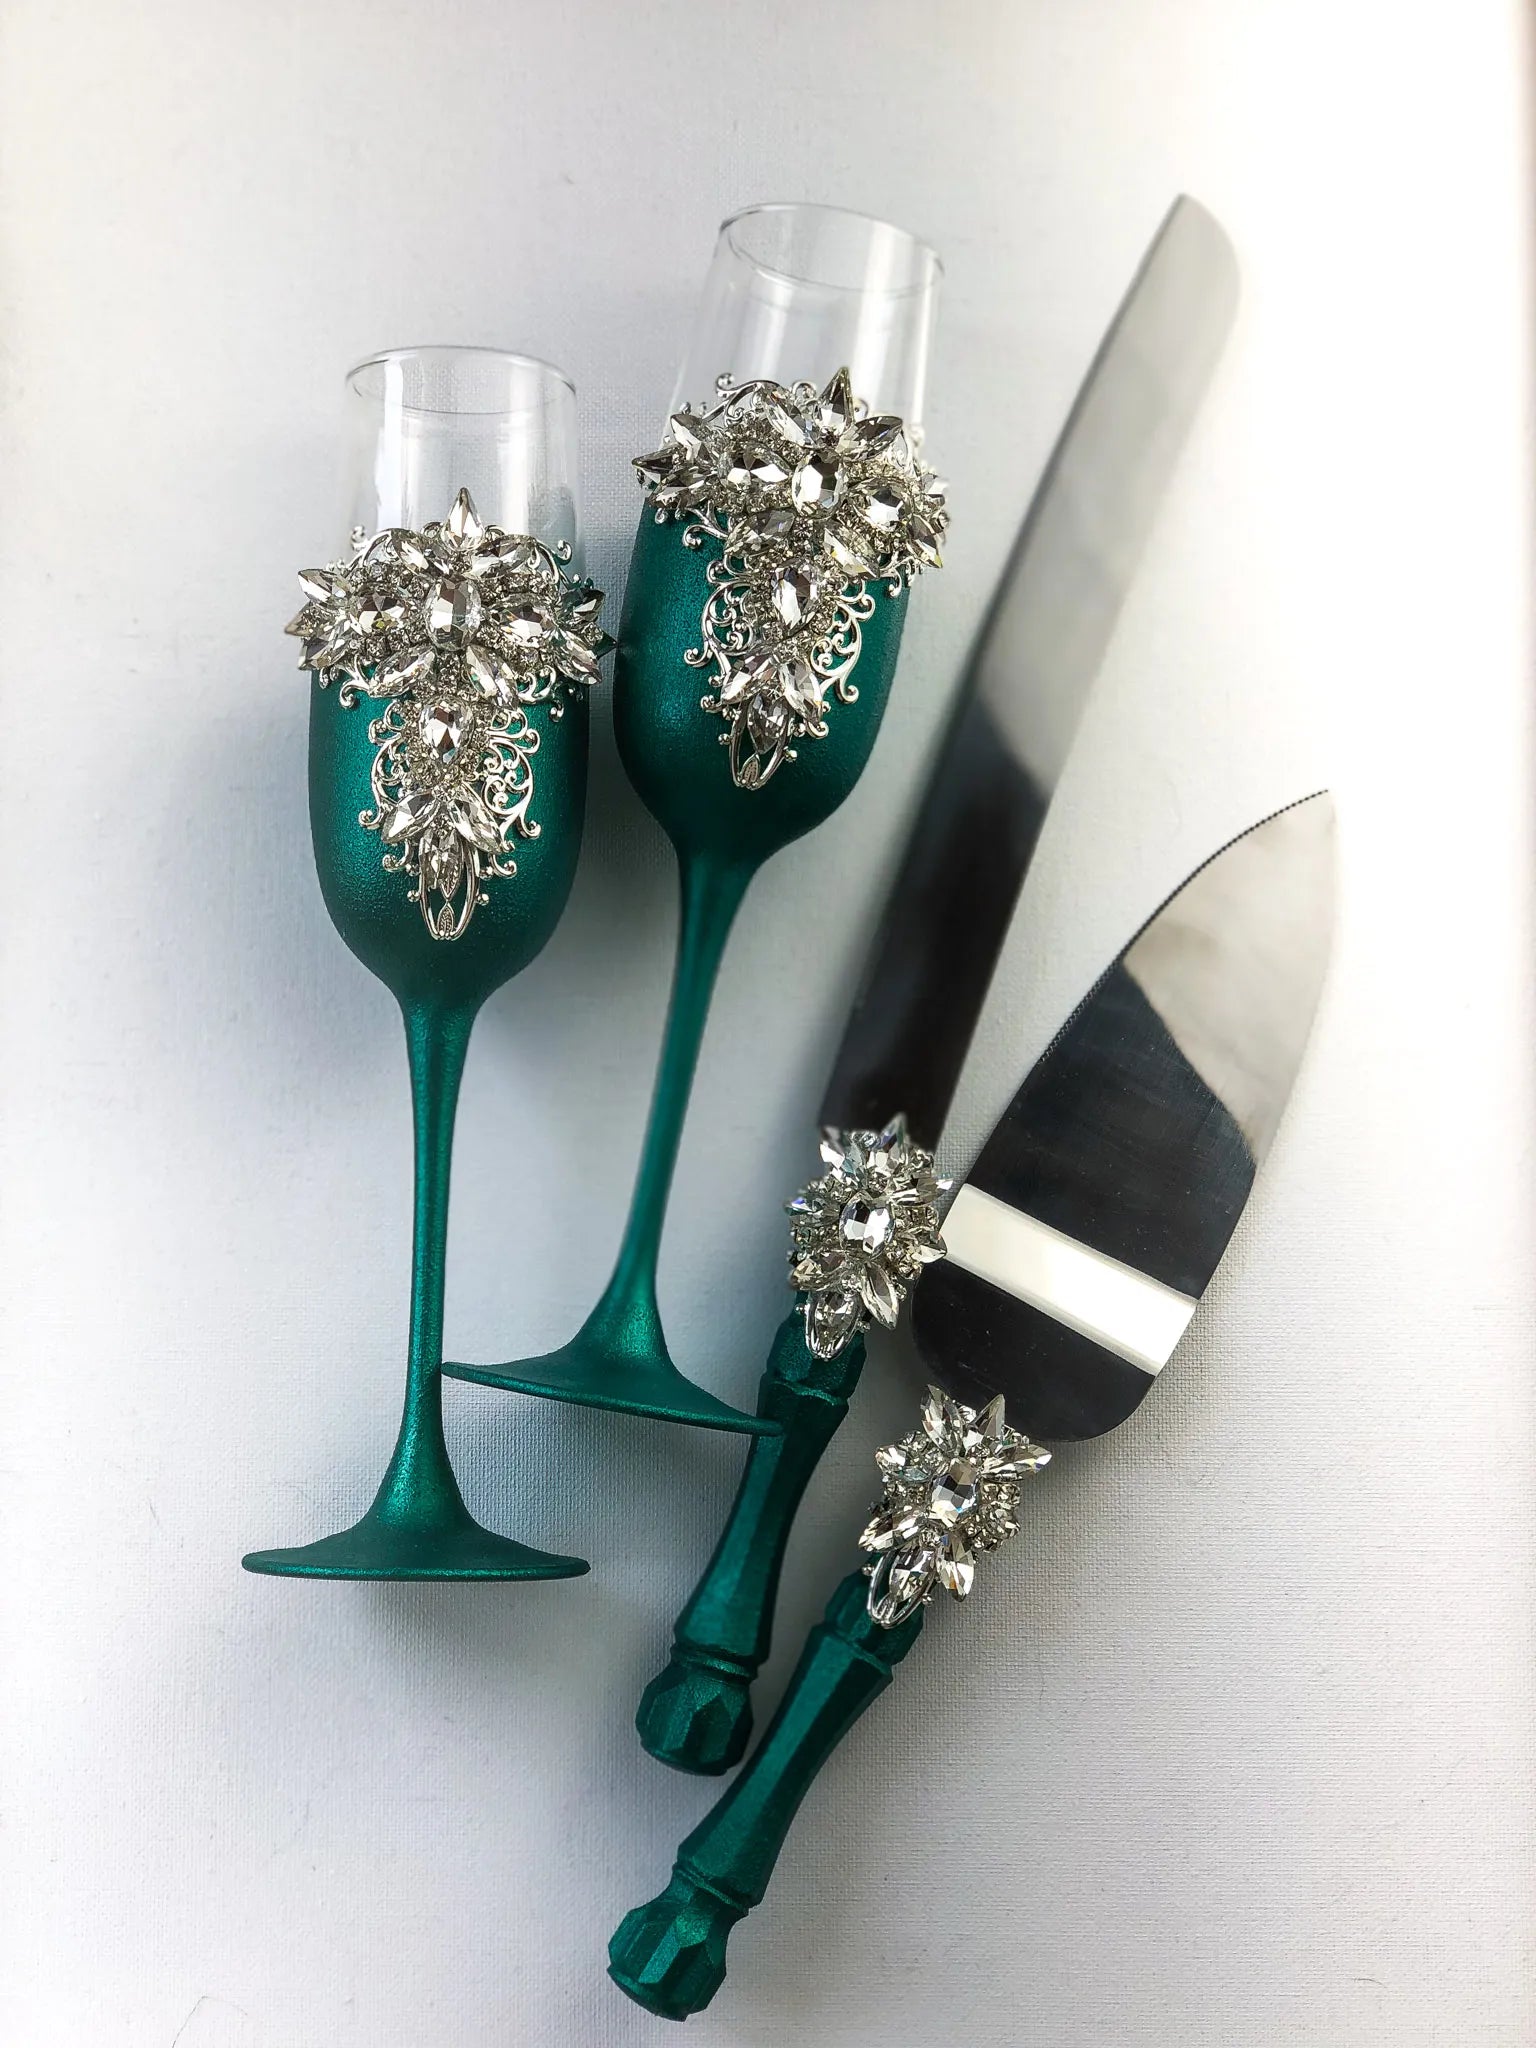 Emerald and Silver Wedding Glasses and Cake Serving Set with Crystals